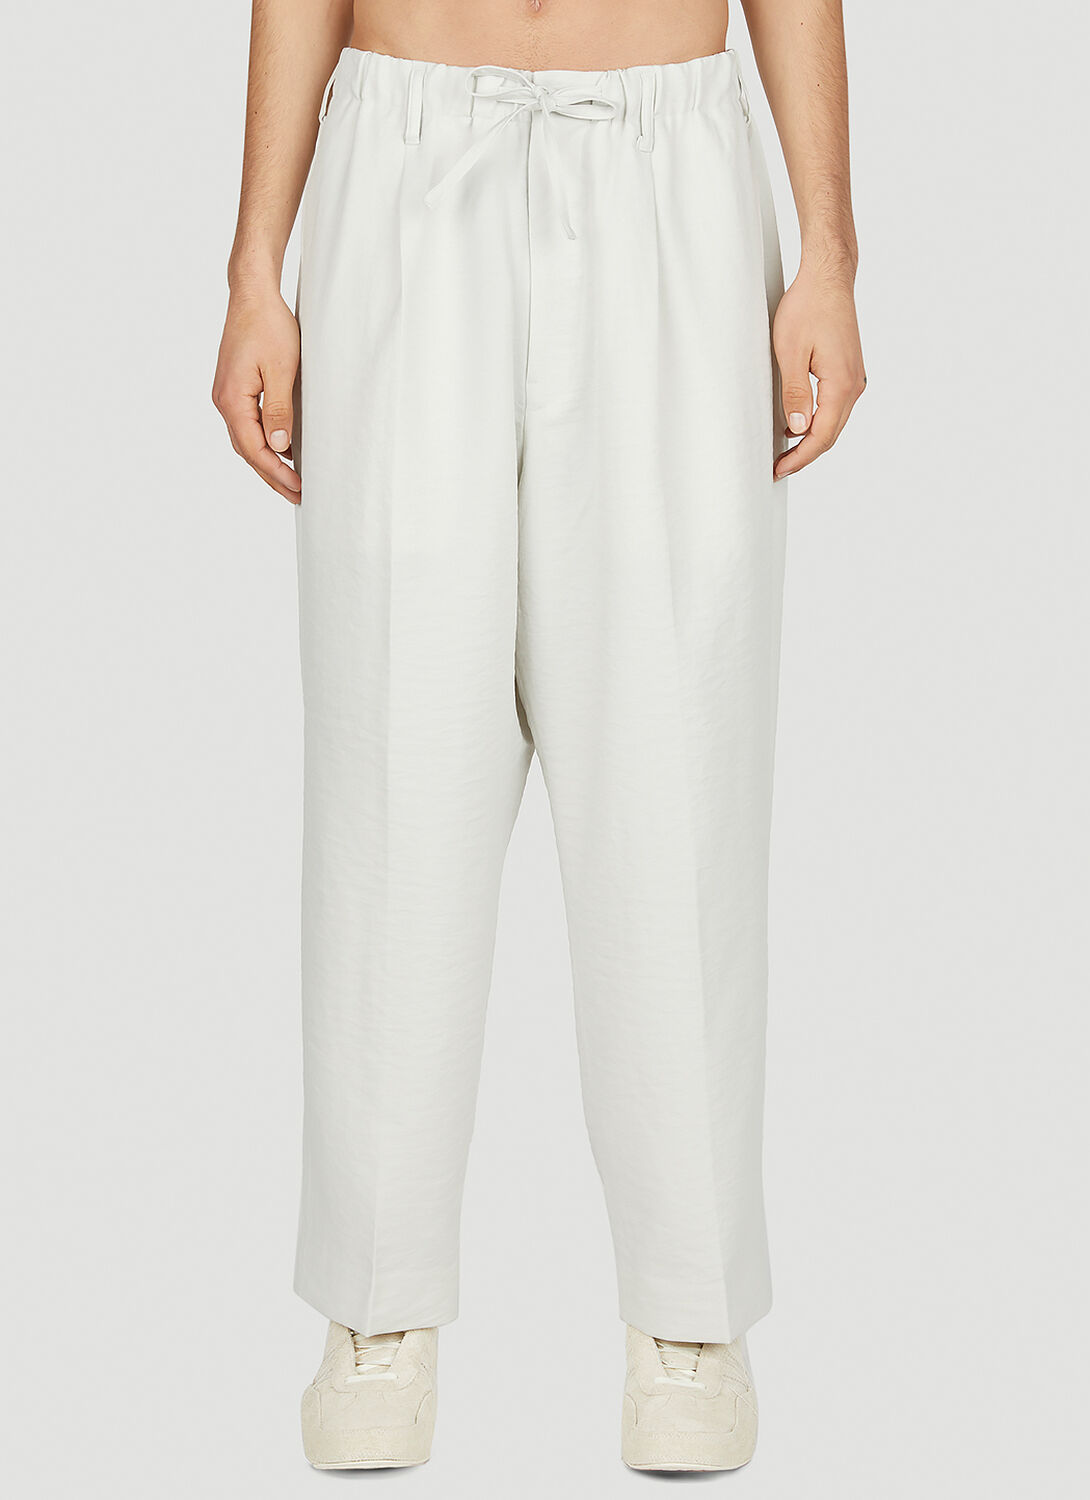 Y-3 Logo Patch Track Pants